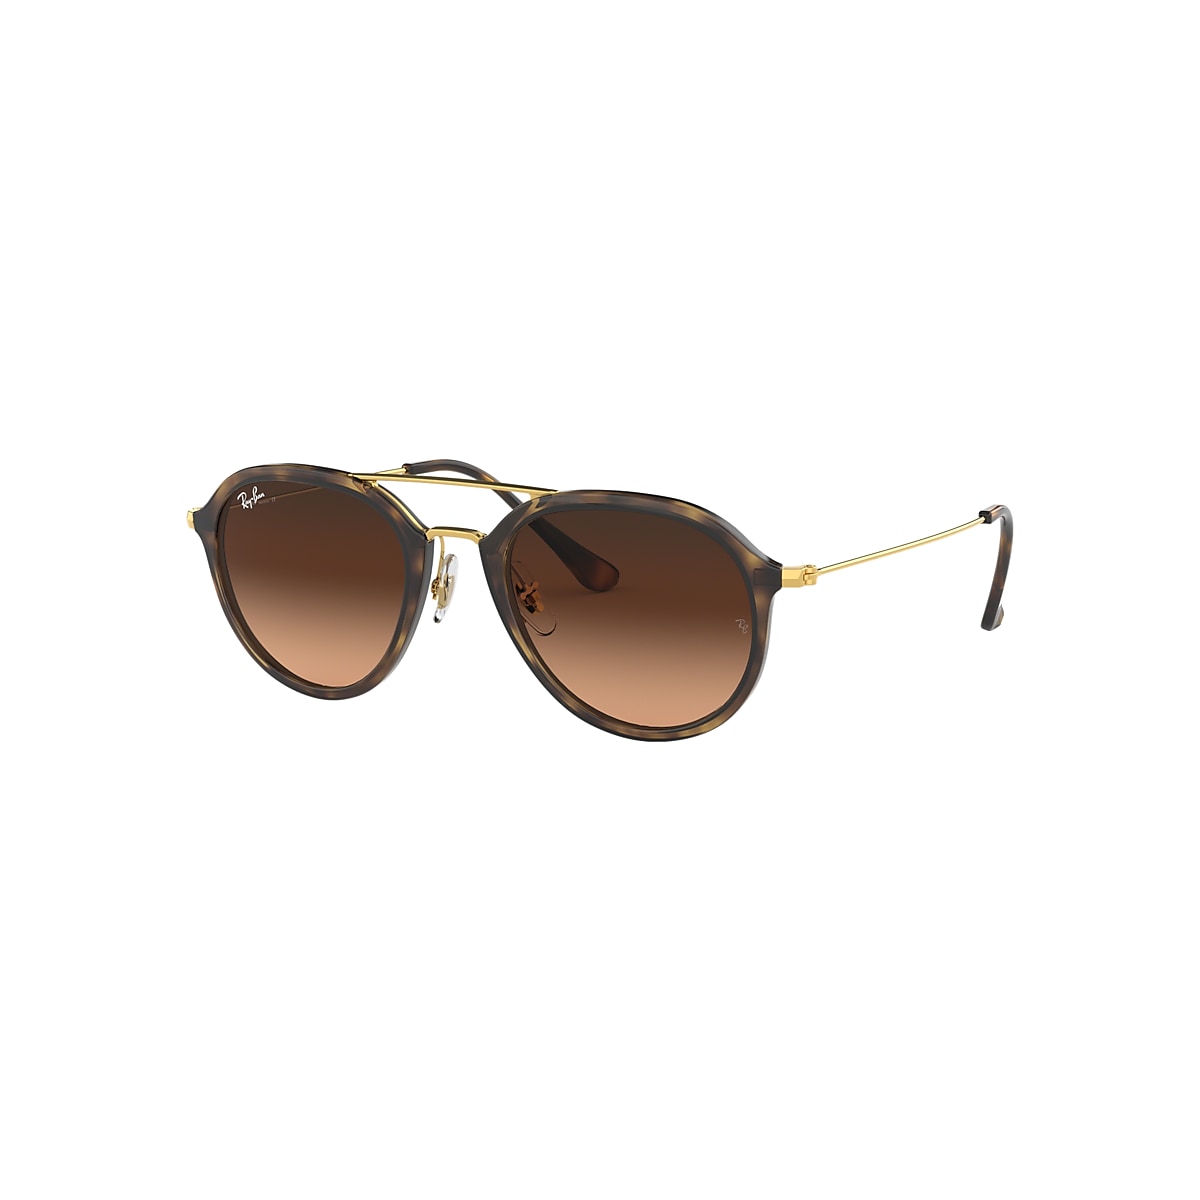 RB4253 Sunglasses in Light Havana and Brown - RB4253 - Ray-Ban